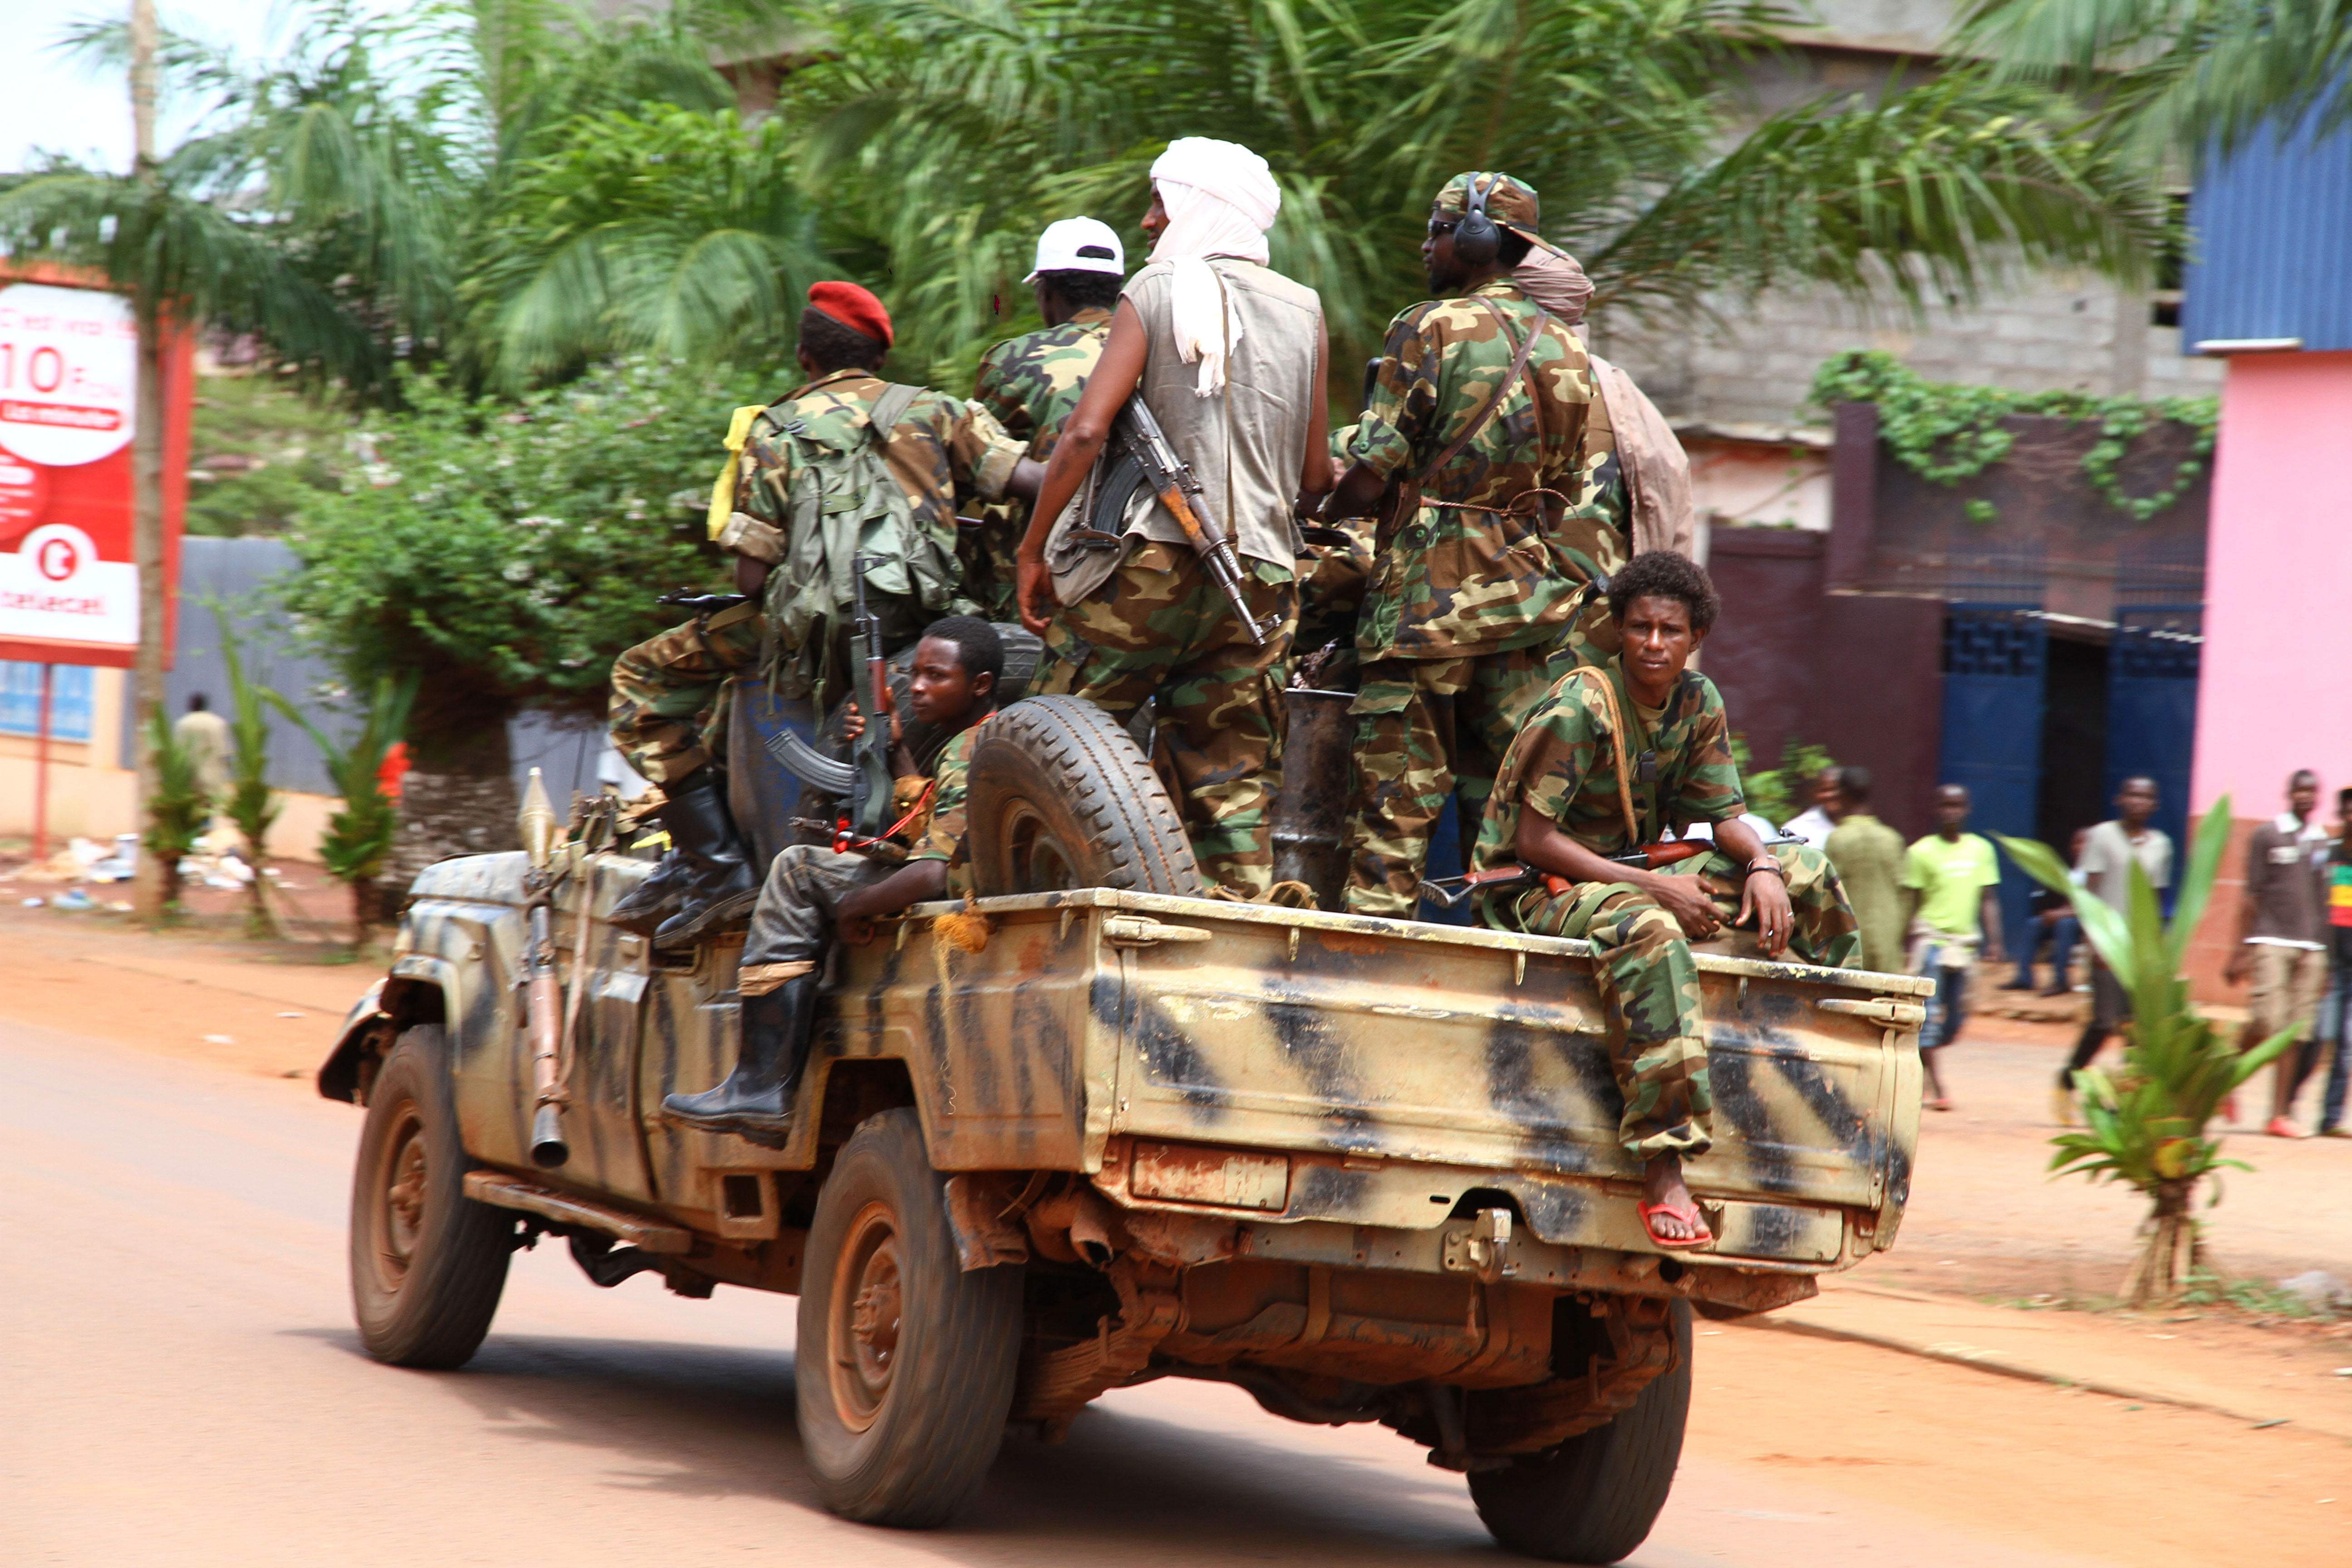 Rights Groups Urge for Swift International Action to Protect Civilians in the Central African Republic 